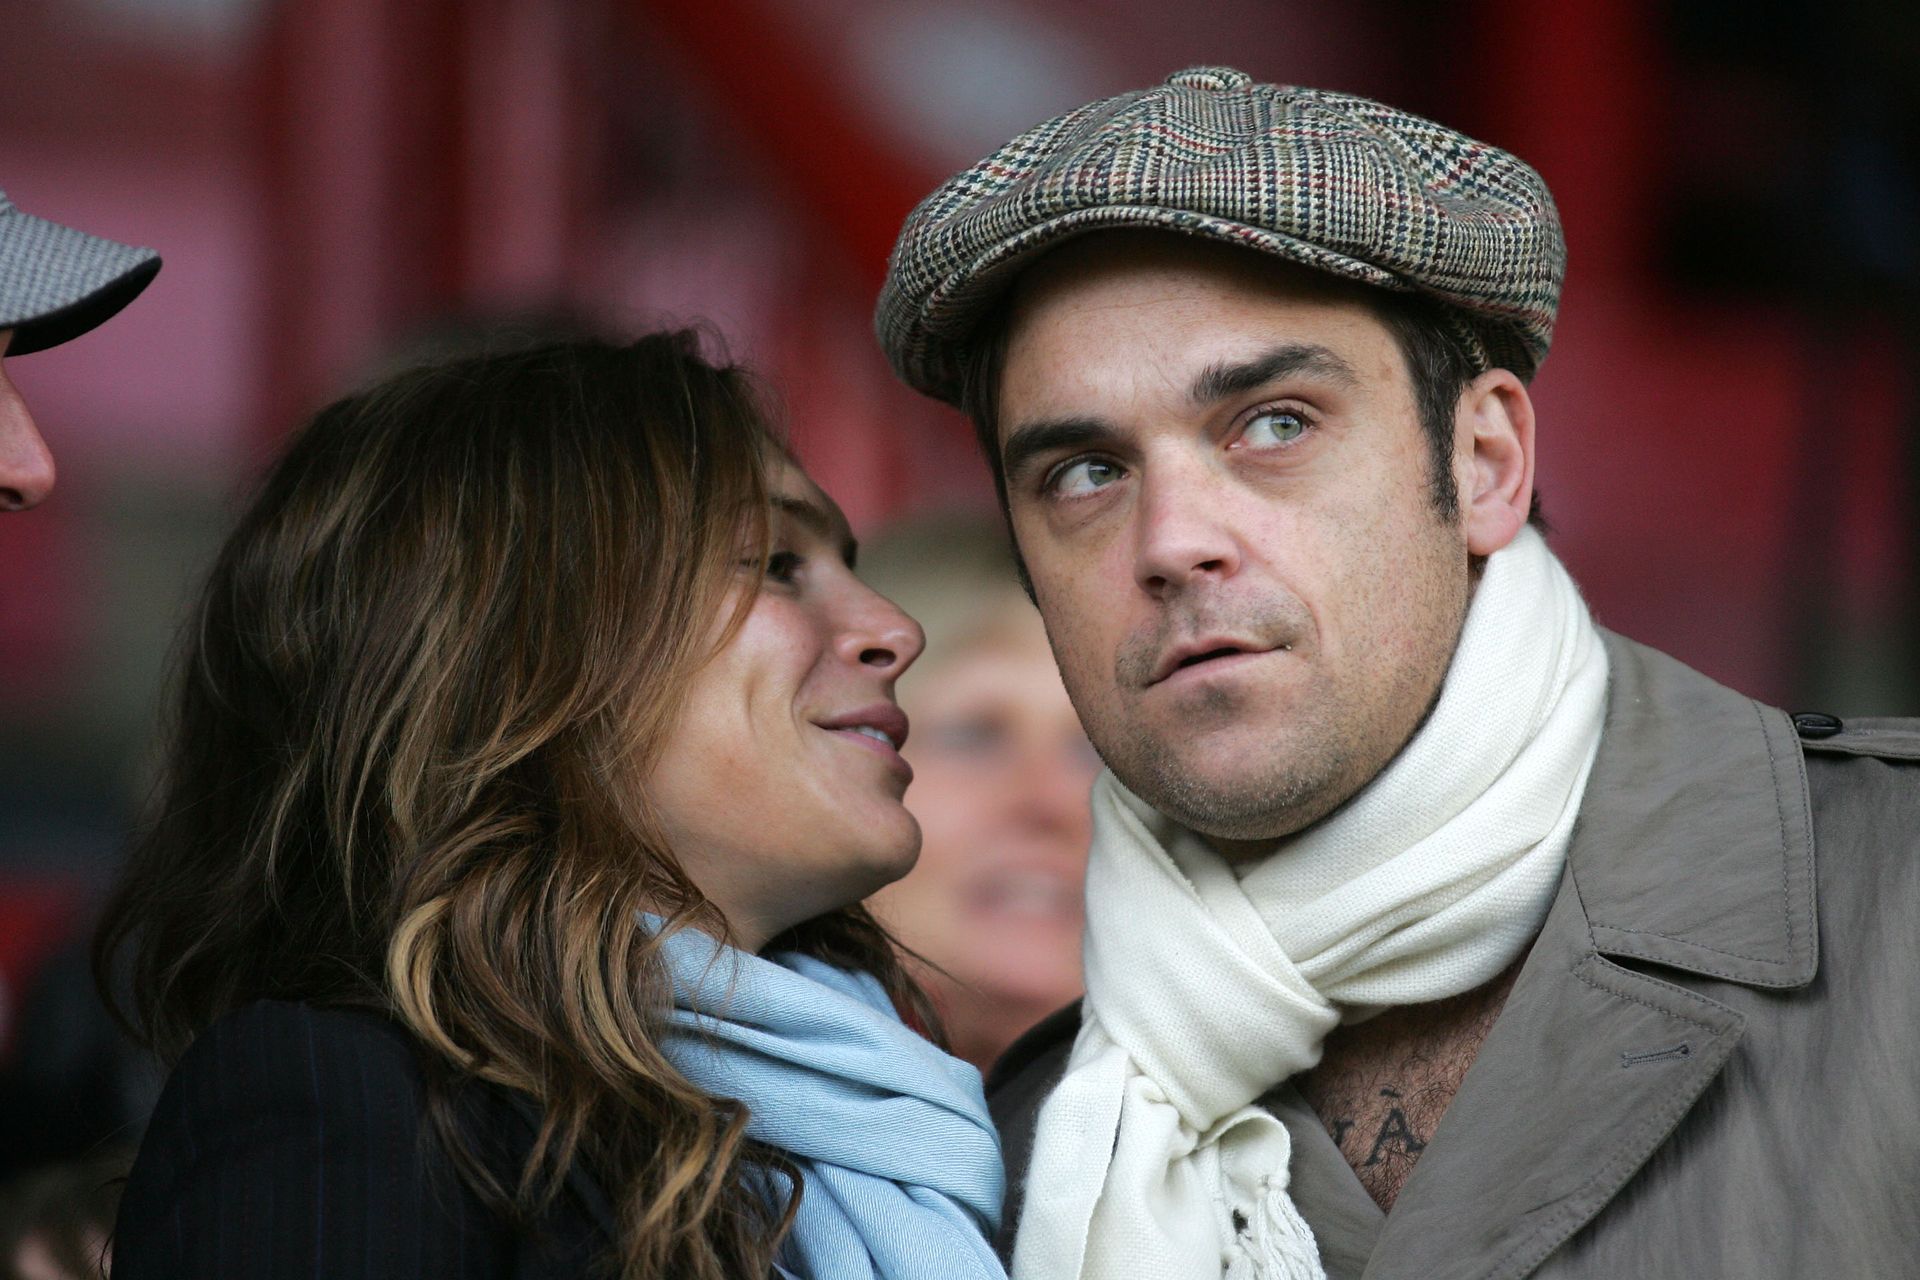 <p>                     Robbie Williams was born in Stoke-on-Trent and the singer grew up supporting Port Vale. The former Take That star has often spoken of his love for the club and was welcomed by thousands of fans at a "Homecoming" concert in 2022.                   </p>                                      <p>                     Despite joking that he's "a Spurs fan now" as the club sent him a shirt in 2023 after he reworked his hit Angels to fan lyrics about manager Ange Postecoglou, Williams remains a Vale supporter and has reportedly considered investing in the club.                   </p>